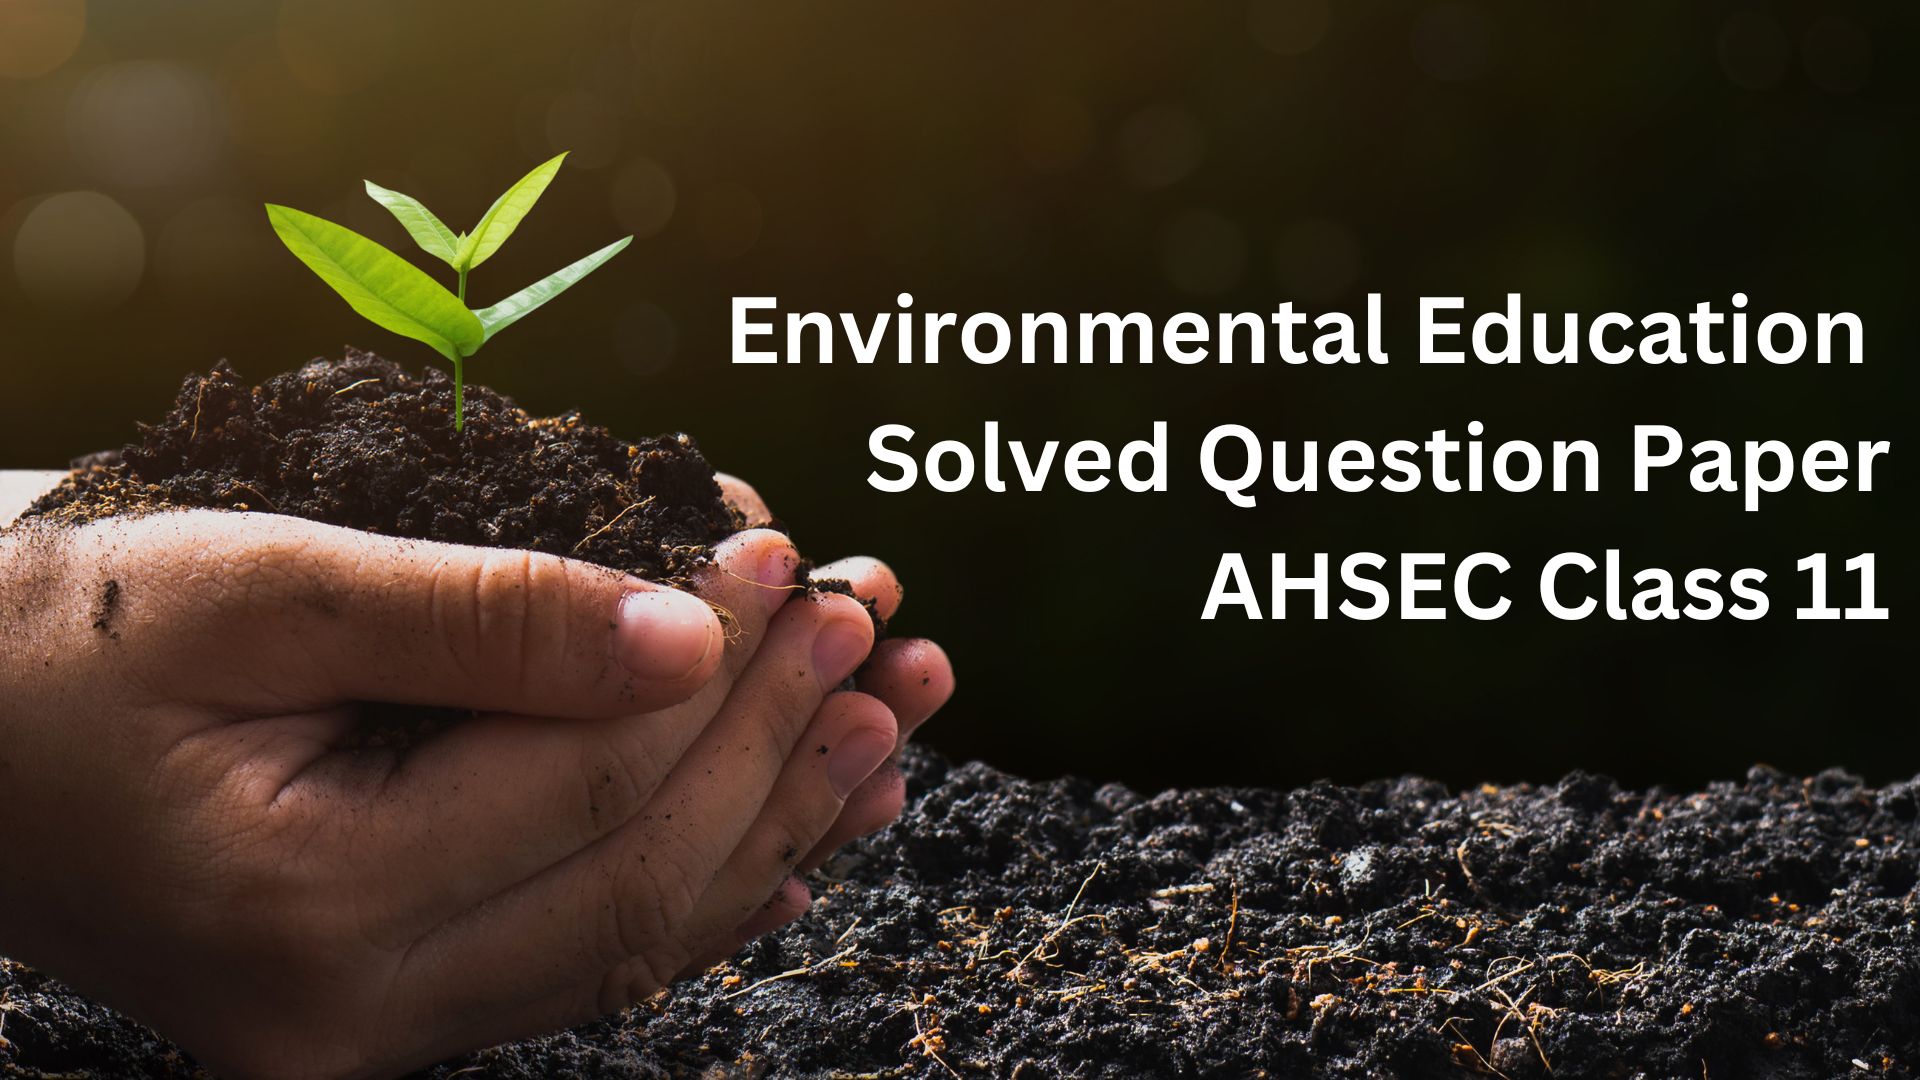 Environmental Education Solved Question Paper 2018